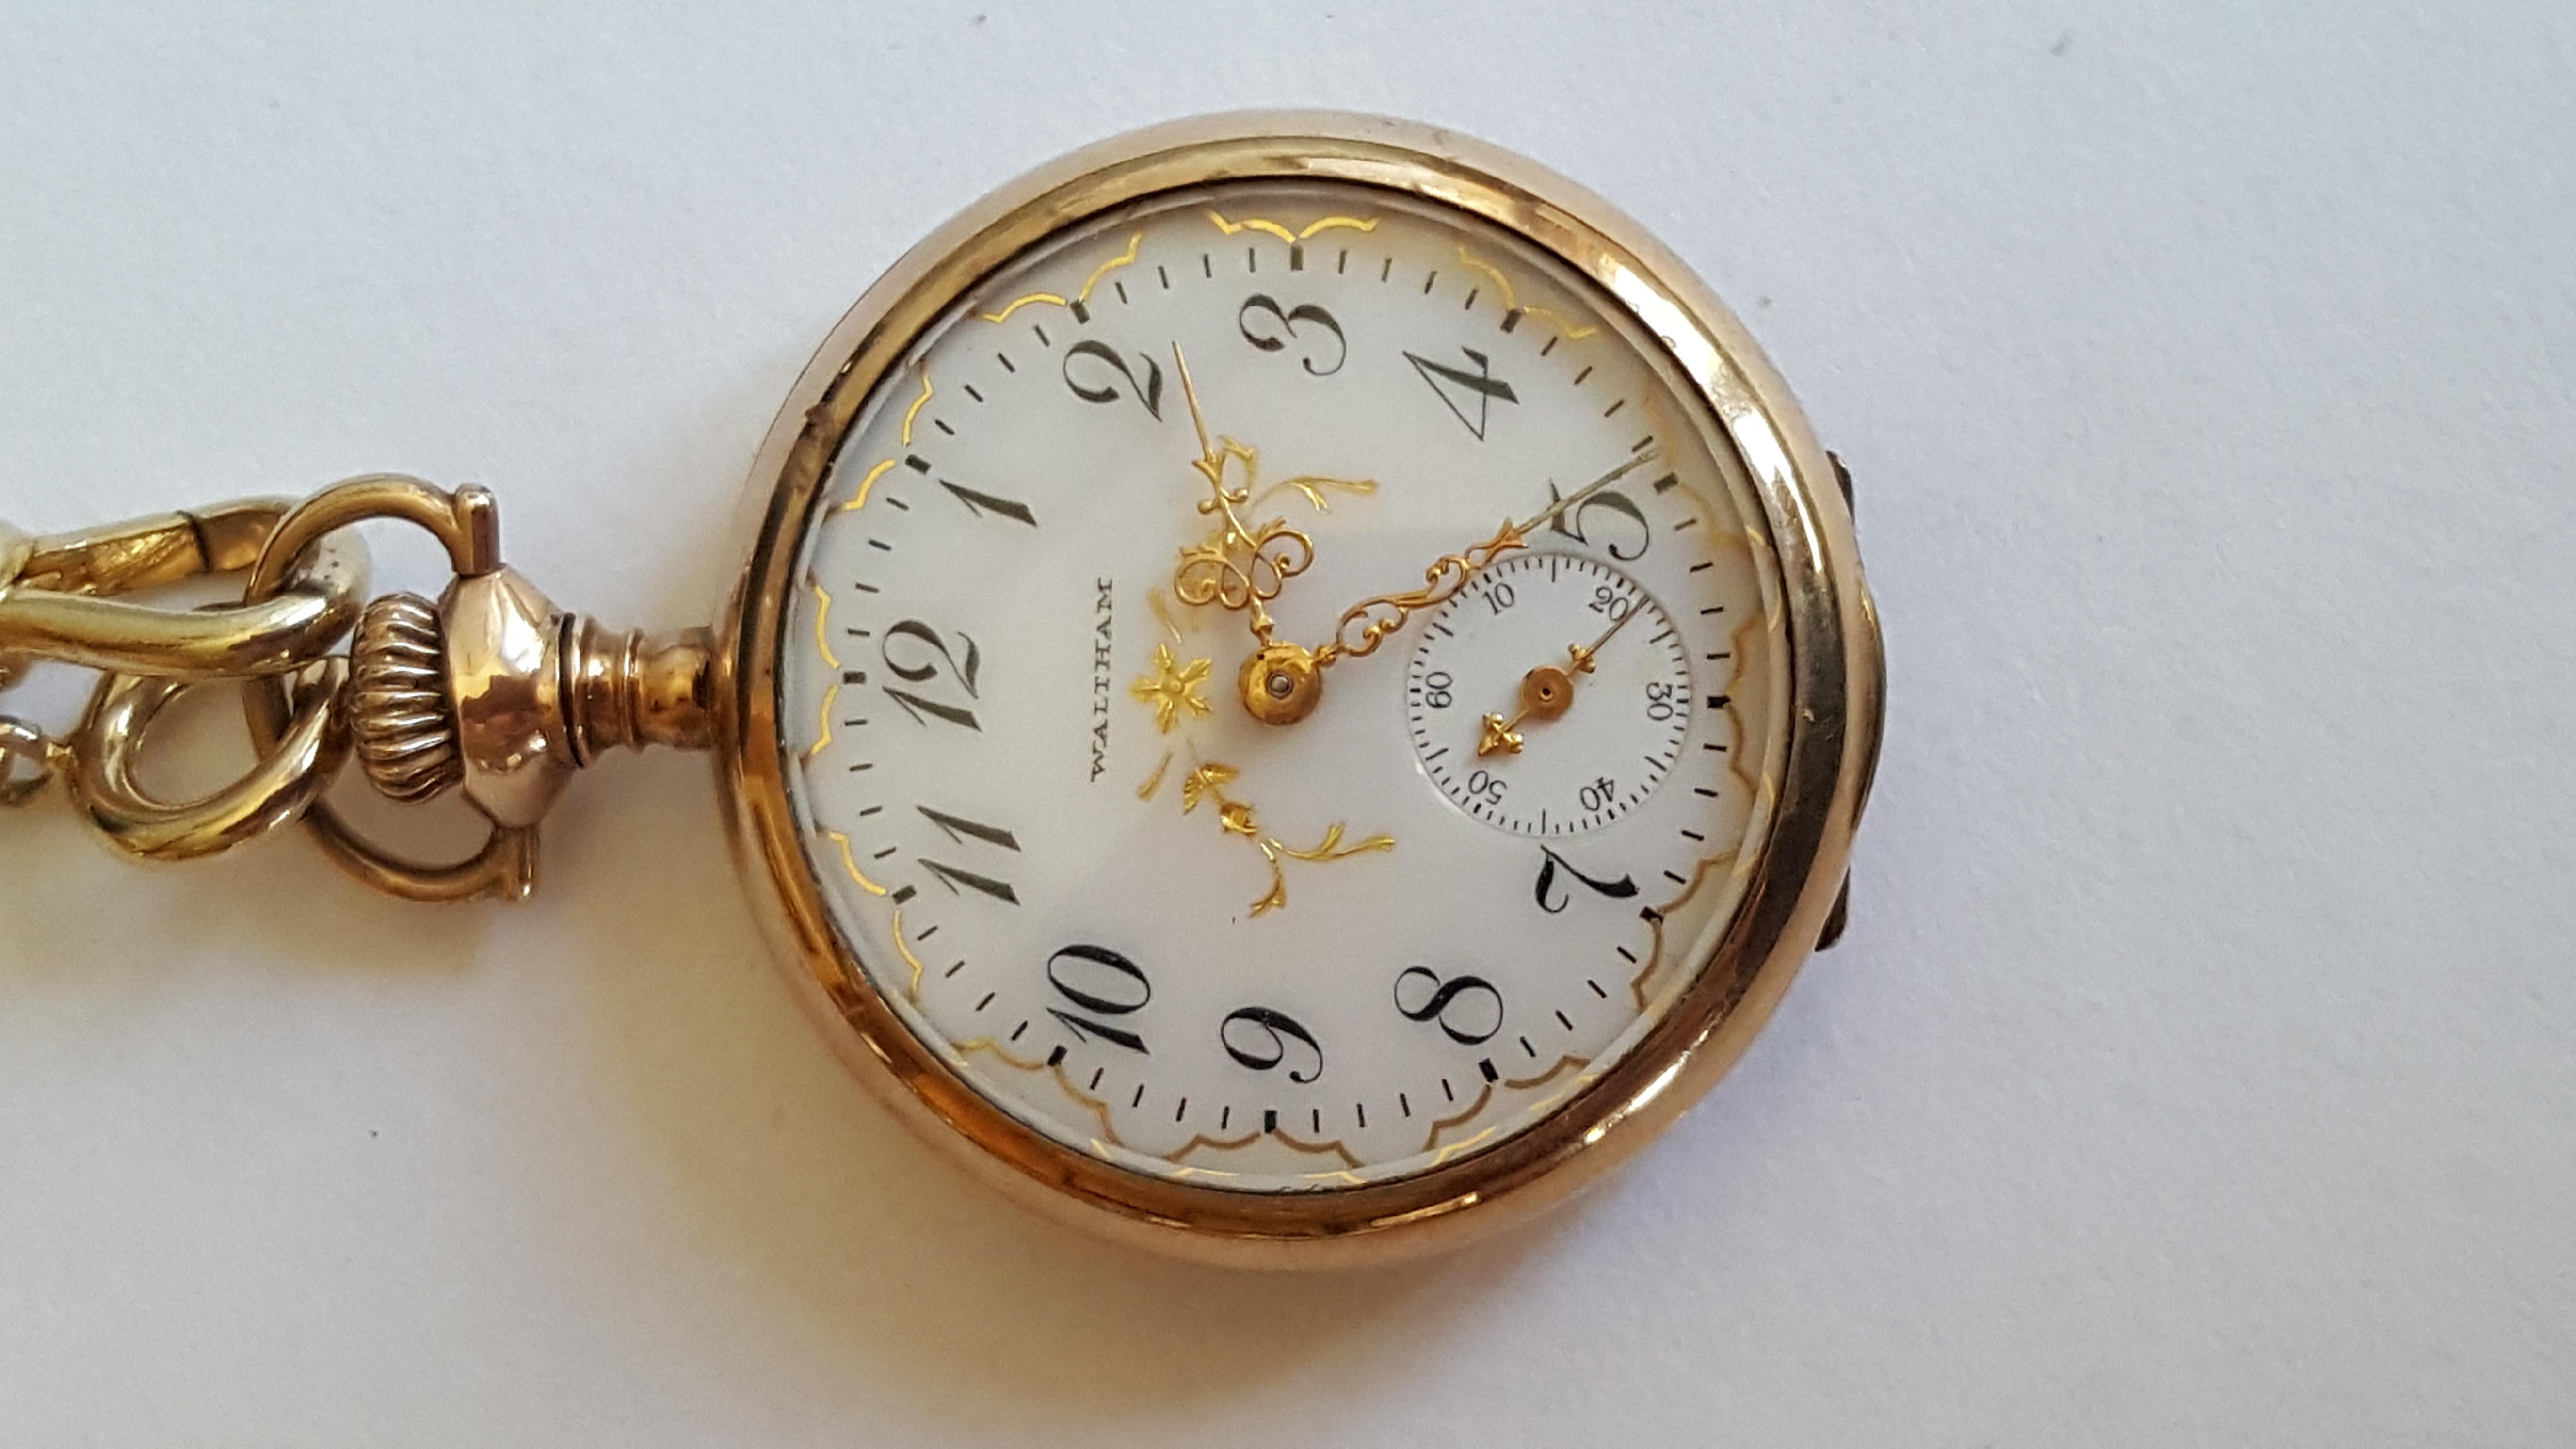 Vintage Gold Plated Waltham Pocket Watch, Year 1903, Model 1900, 15 Jewel, Open Face, 32 mm Small. Very nice watch is great condition, Case, White Face, Gold Detailing - Working. The seconds hand works. too. Comes with a wrist chain. 

This is a